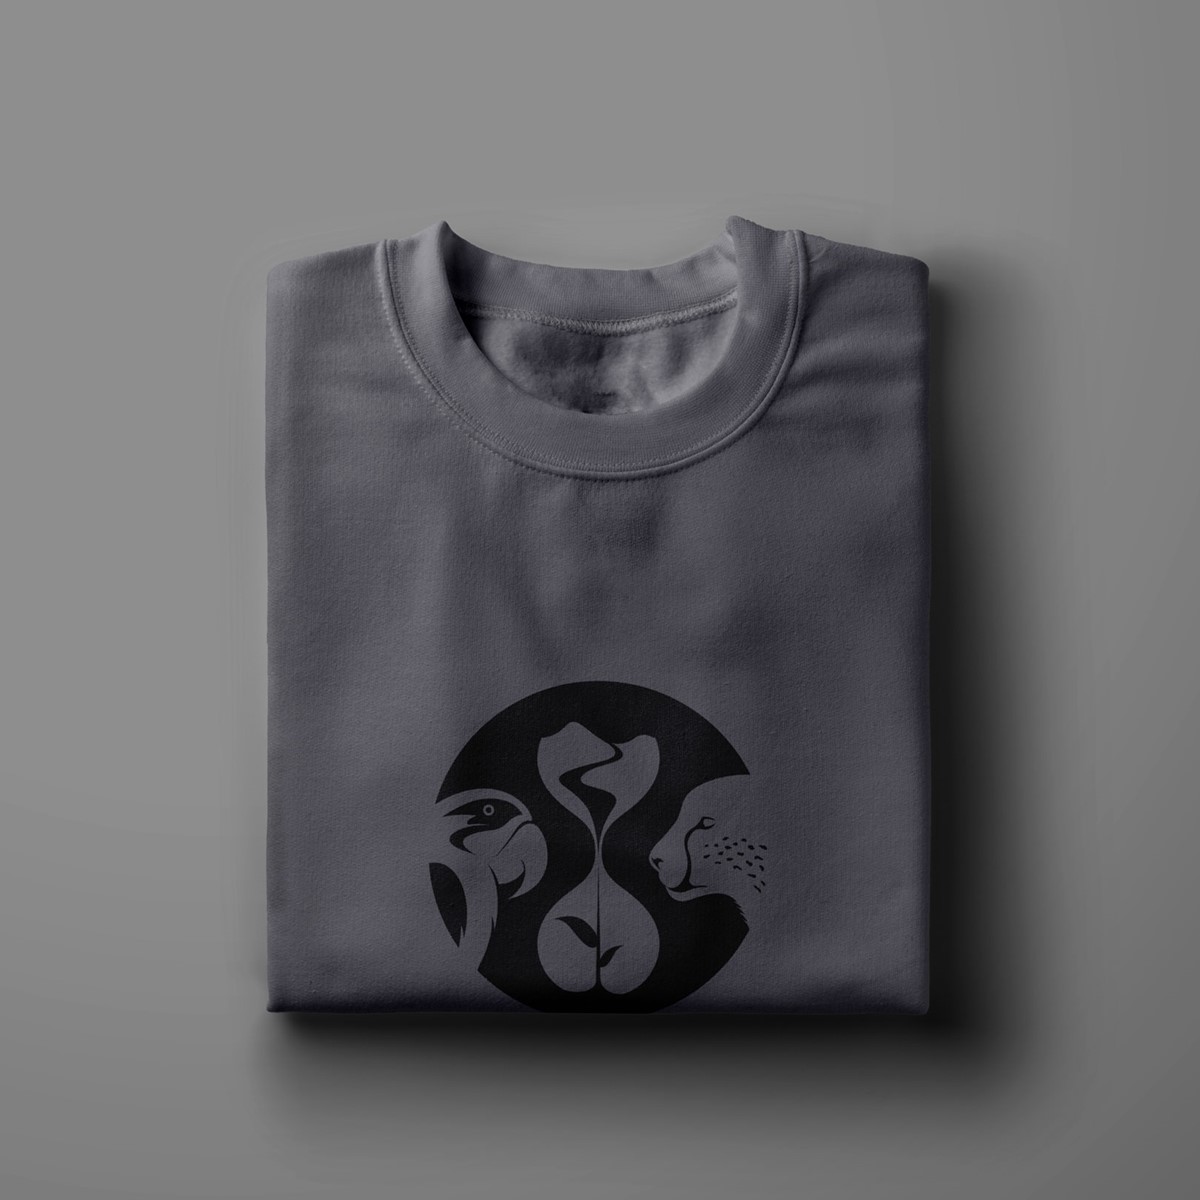 QRFN. Quick Response Fund for Nature – Logo t-shirt mock-up. Brand identity design by Superfried. 